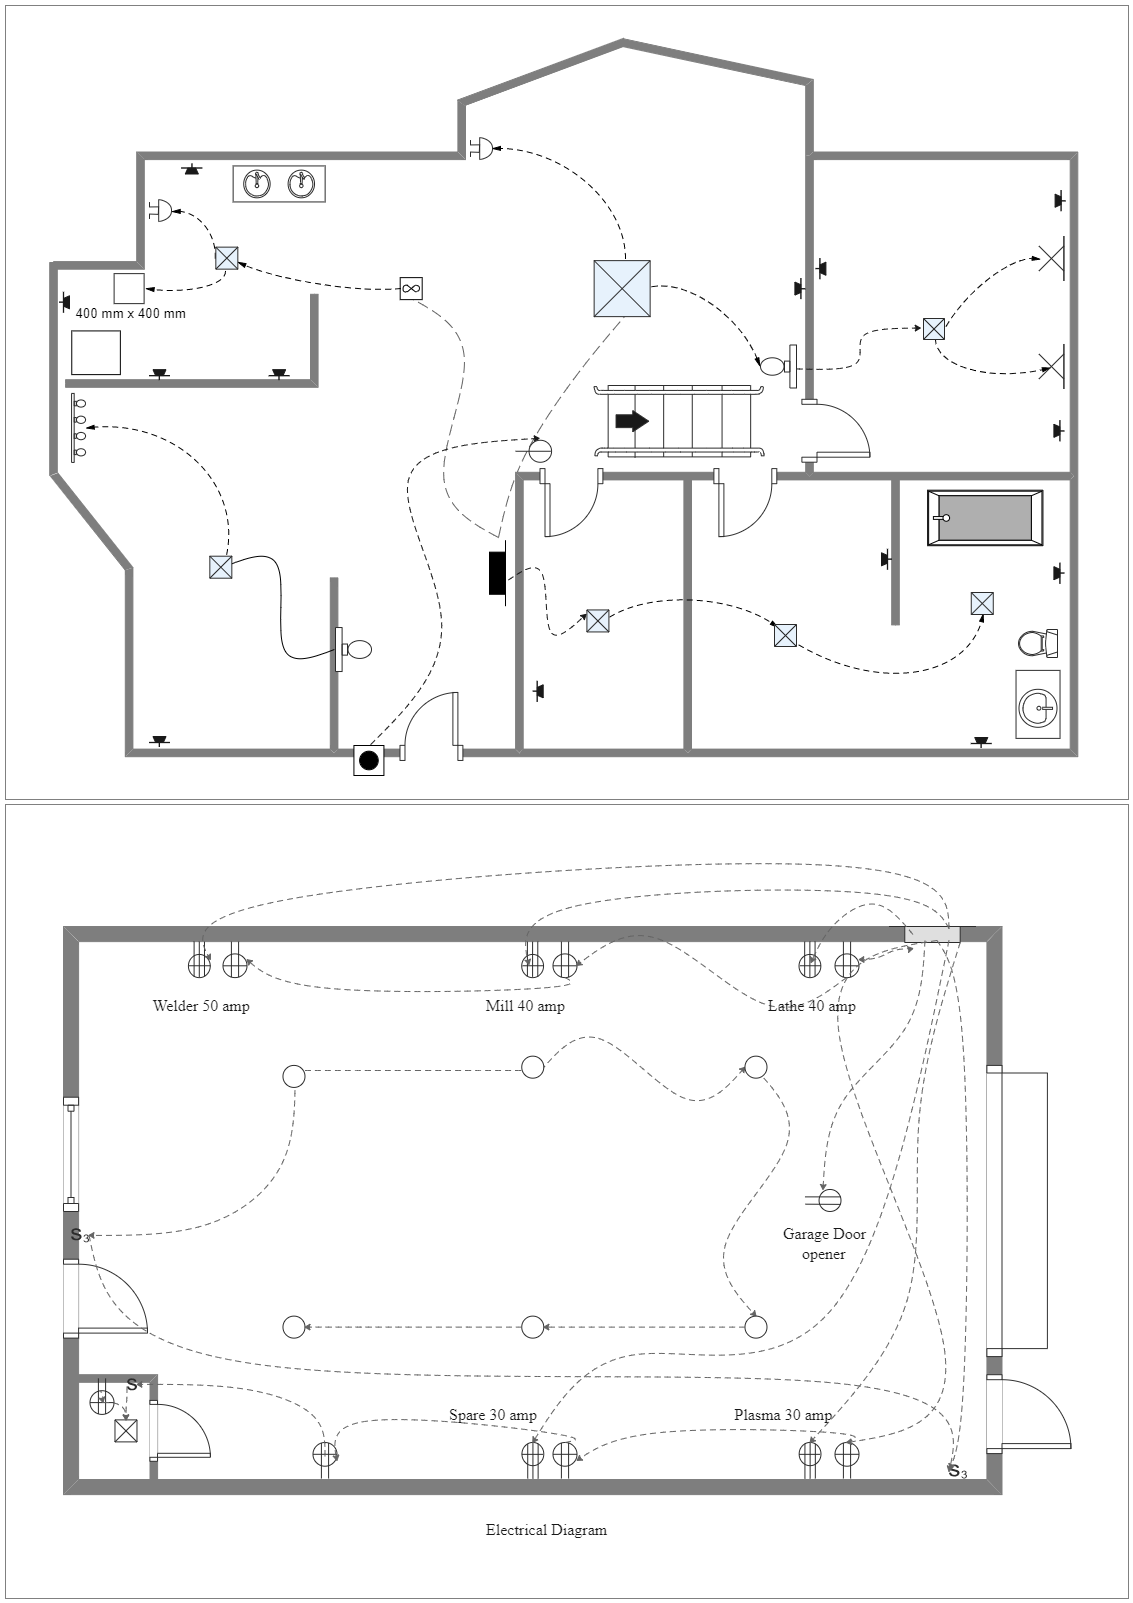 Here is a workshop floor plan for metal working. In simple terms, workshop layout is the art of planning and positioning machine tools, equipment, operator workbenches, assembly areas, storage areas (for raw material, associated items, and finished produc